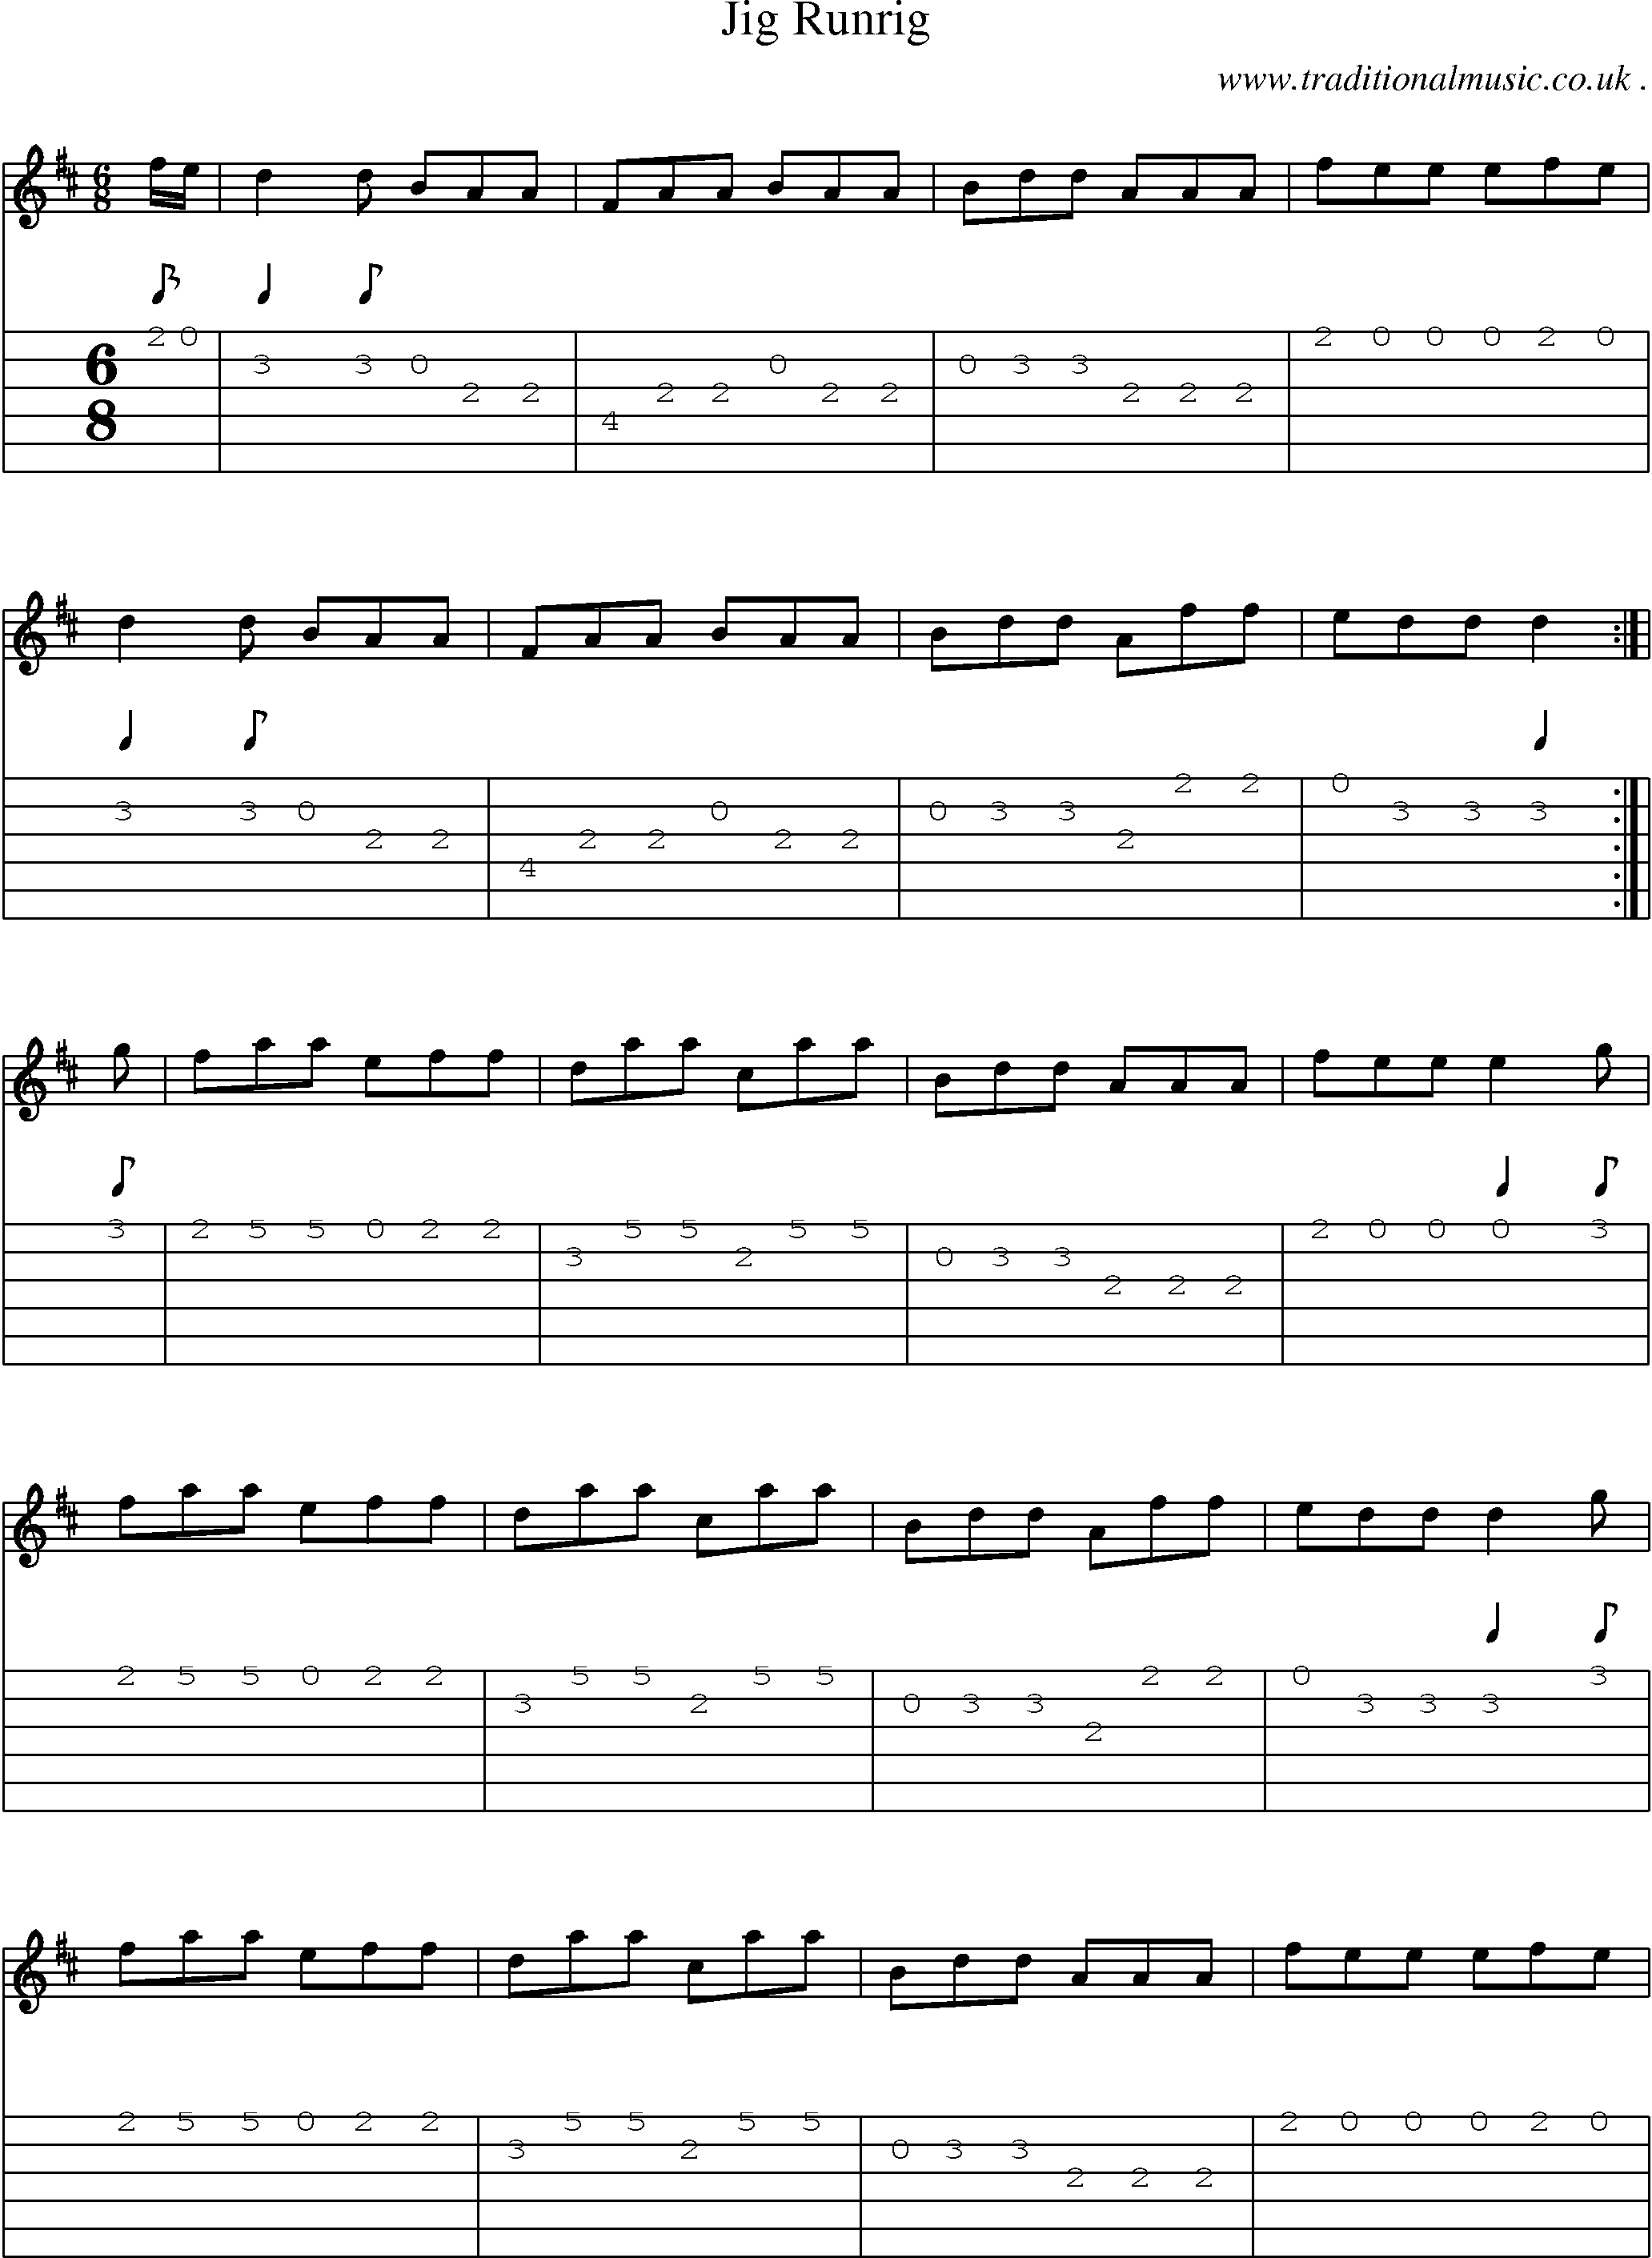 Sheet-Music and Guitar Tabs for Jig Runrig